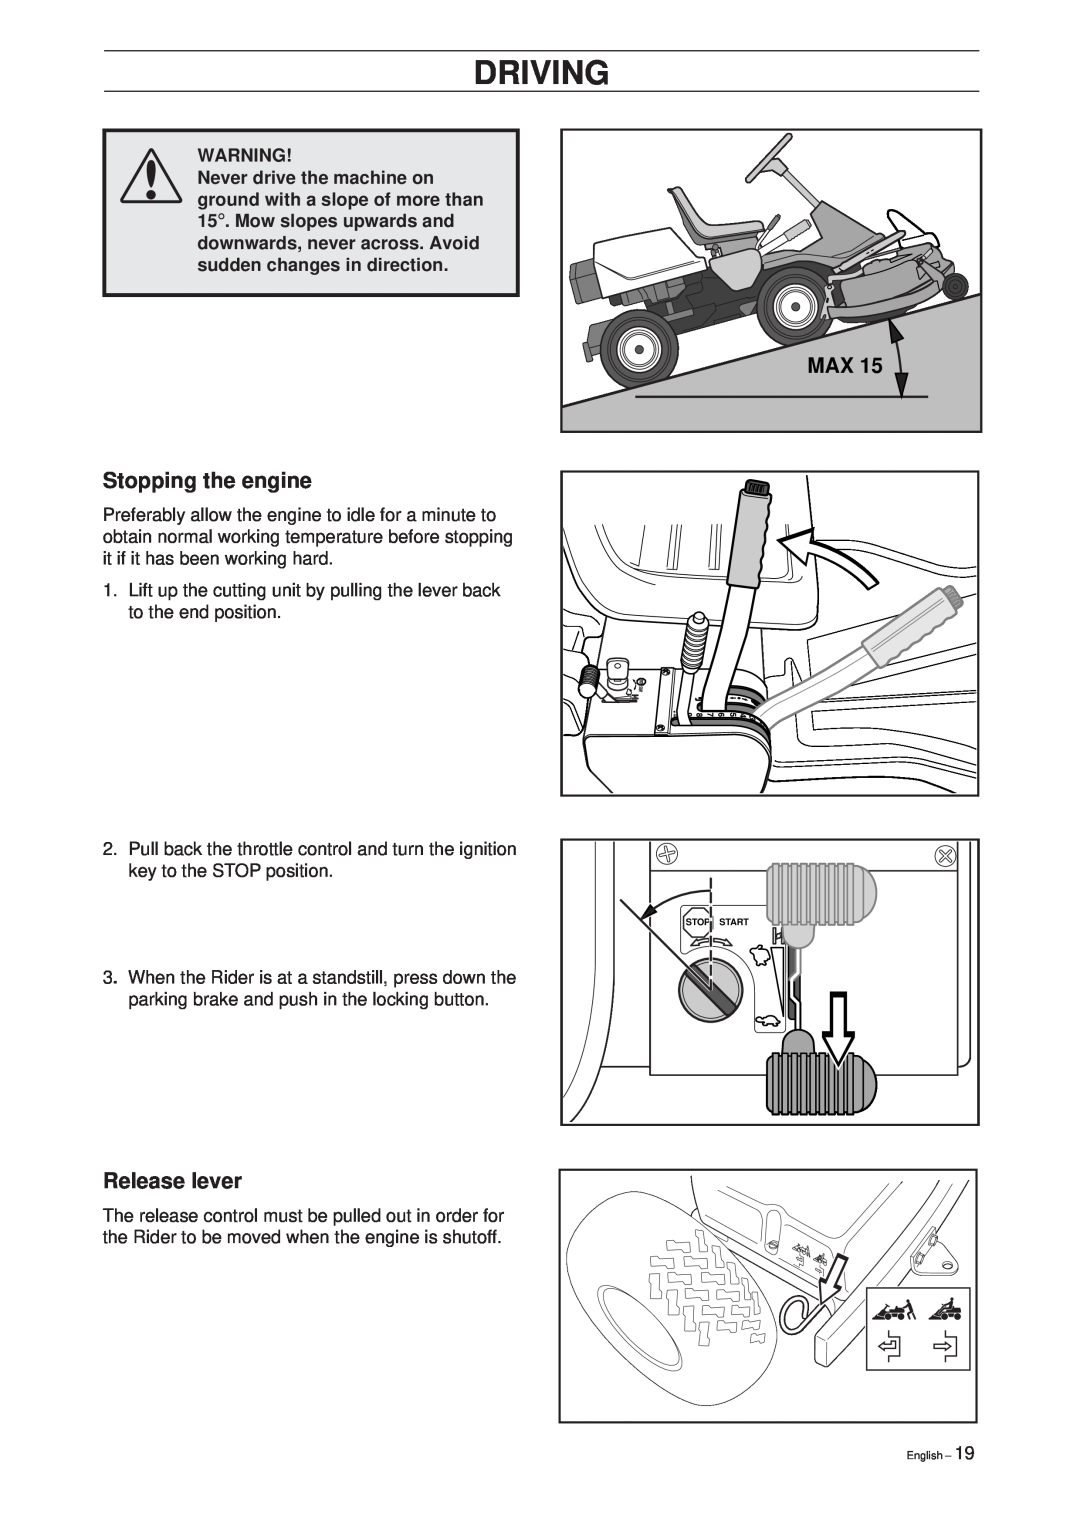 Husqvarna Rider 16 manual Stopping the engine, Release lever, Driving 